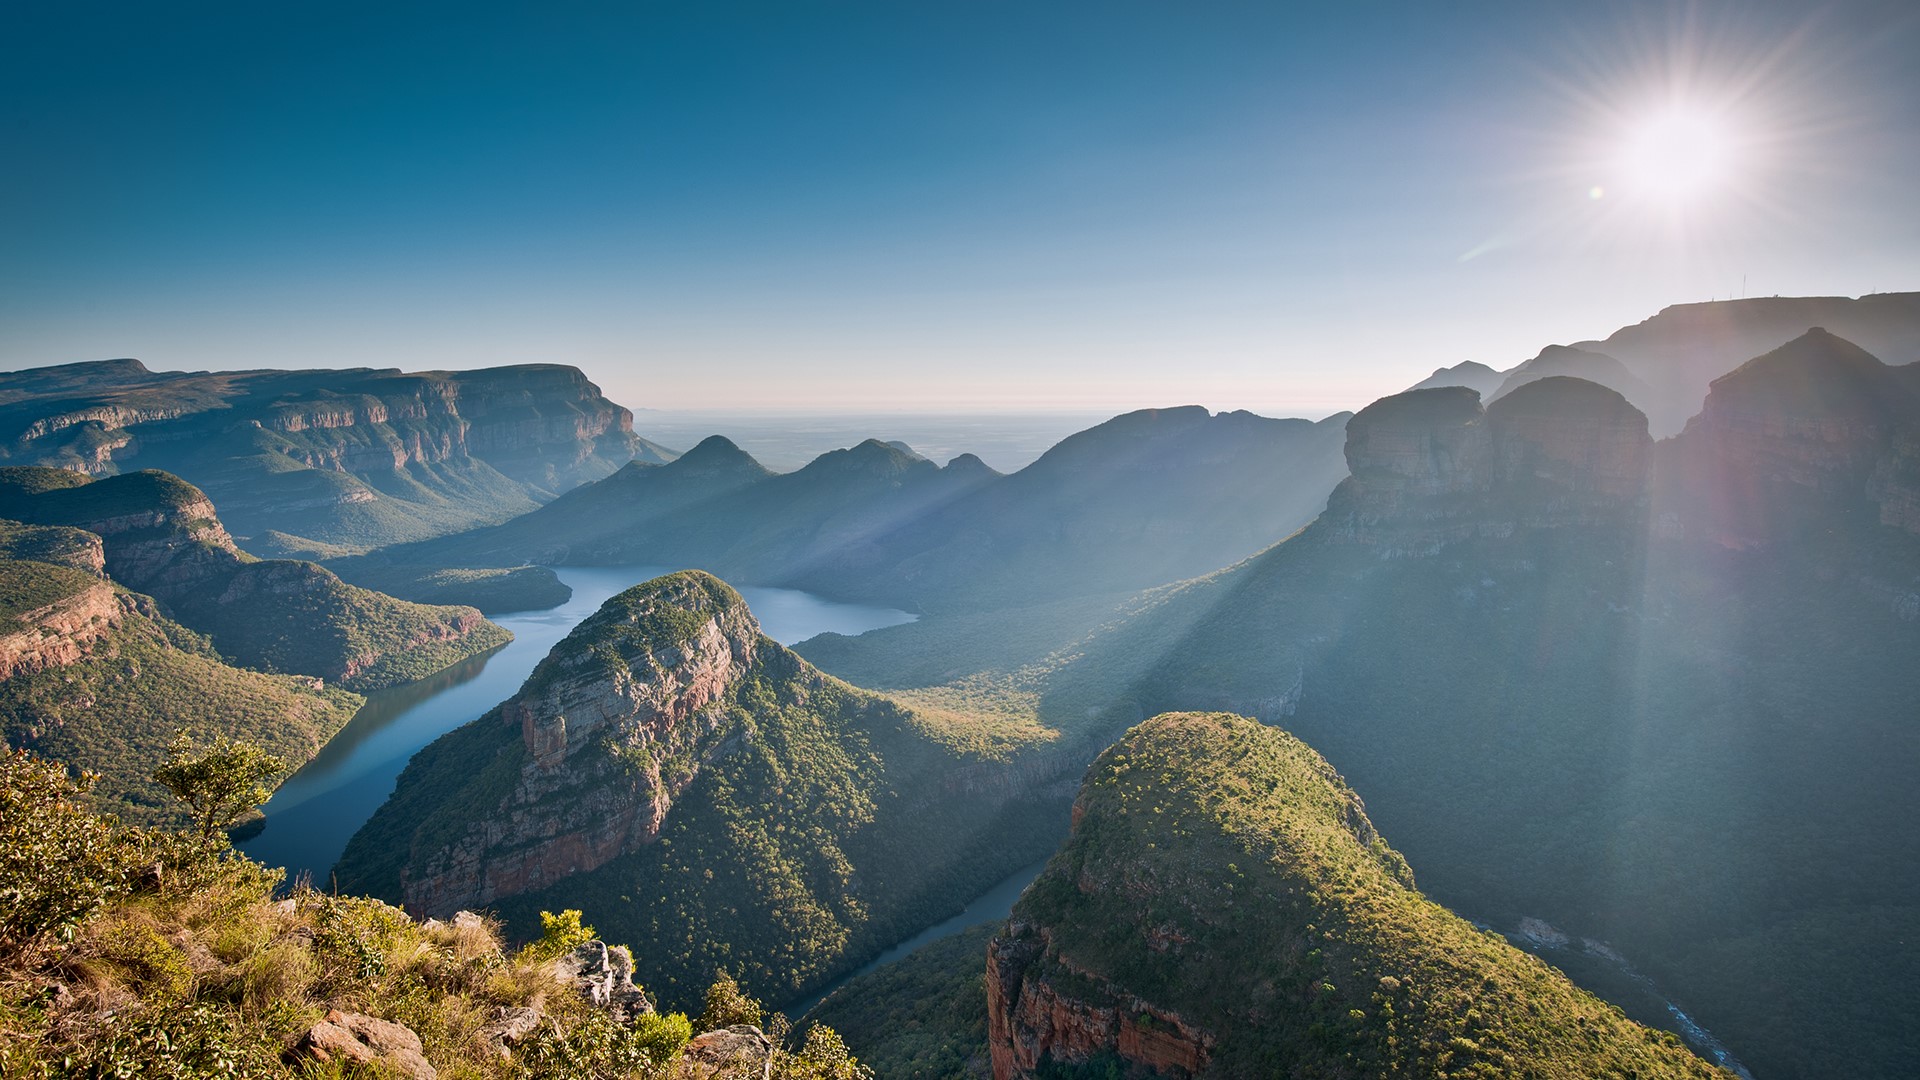 General 1920x1080 nature landscape mountains Sun sun rays plants trees forest horizon sky clear sky river canyon South Africa Blyde River Canyon